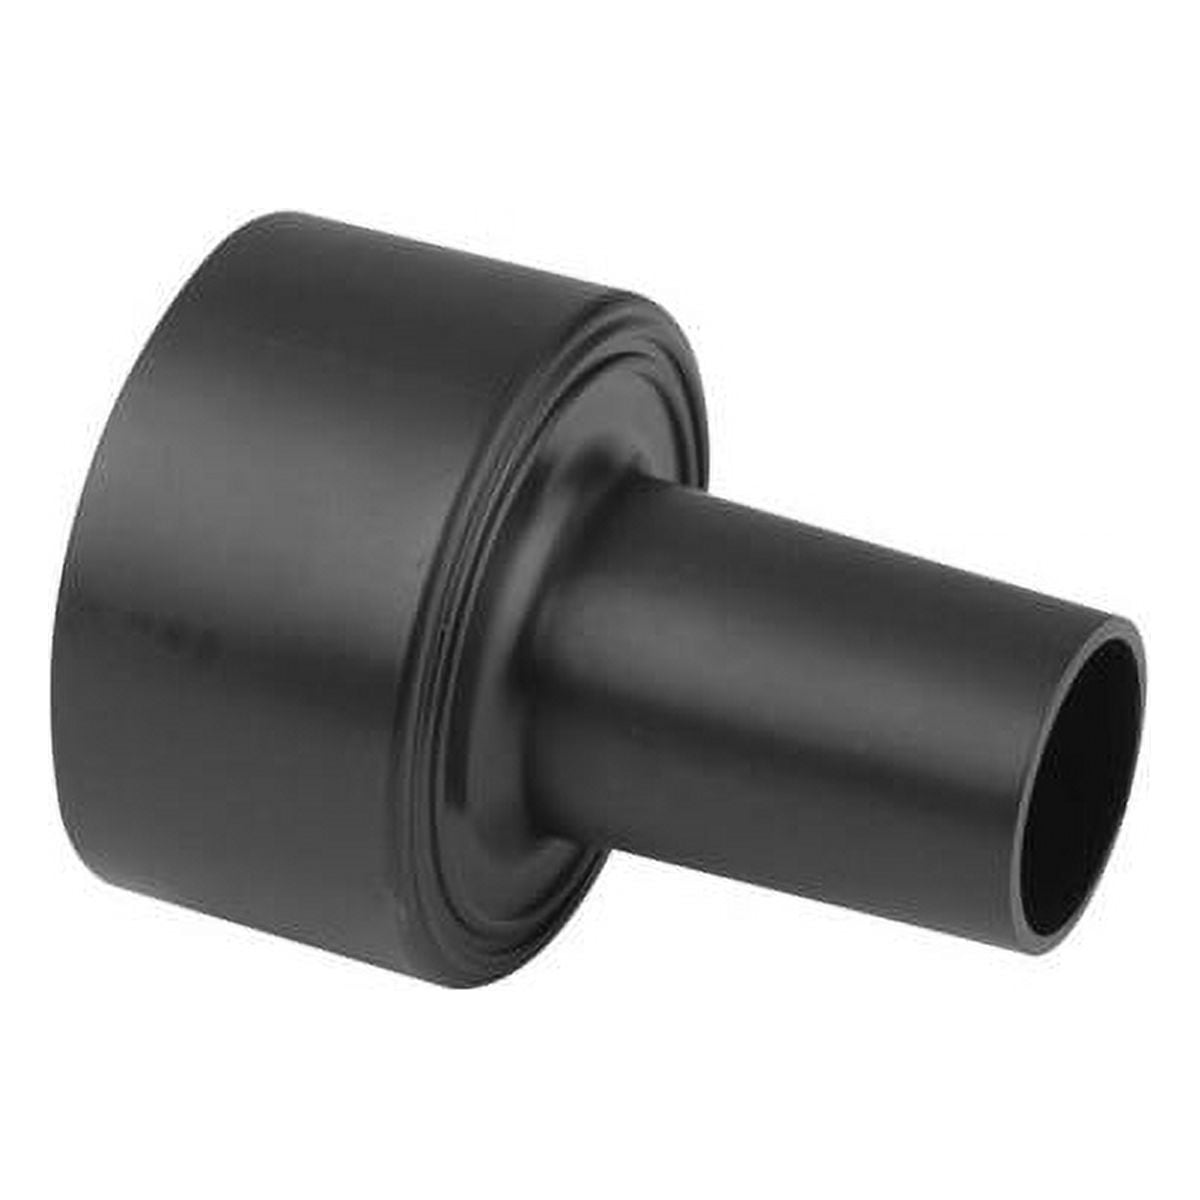 RIDGID Hose to Drain Adapter Vacuum Part for Most Wet/Dry Shop